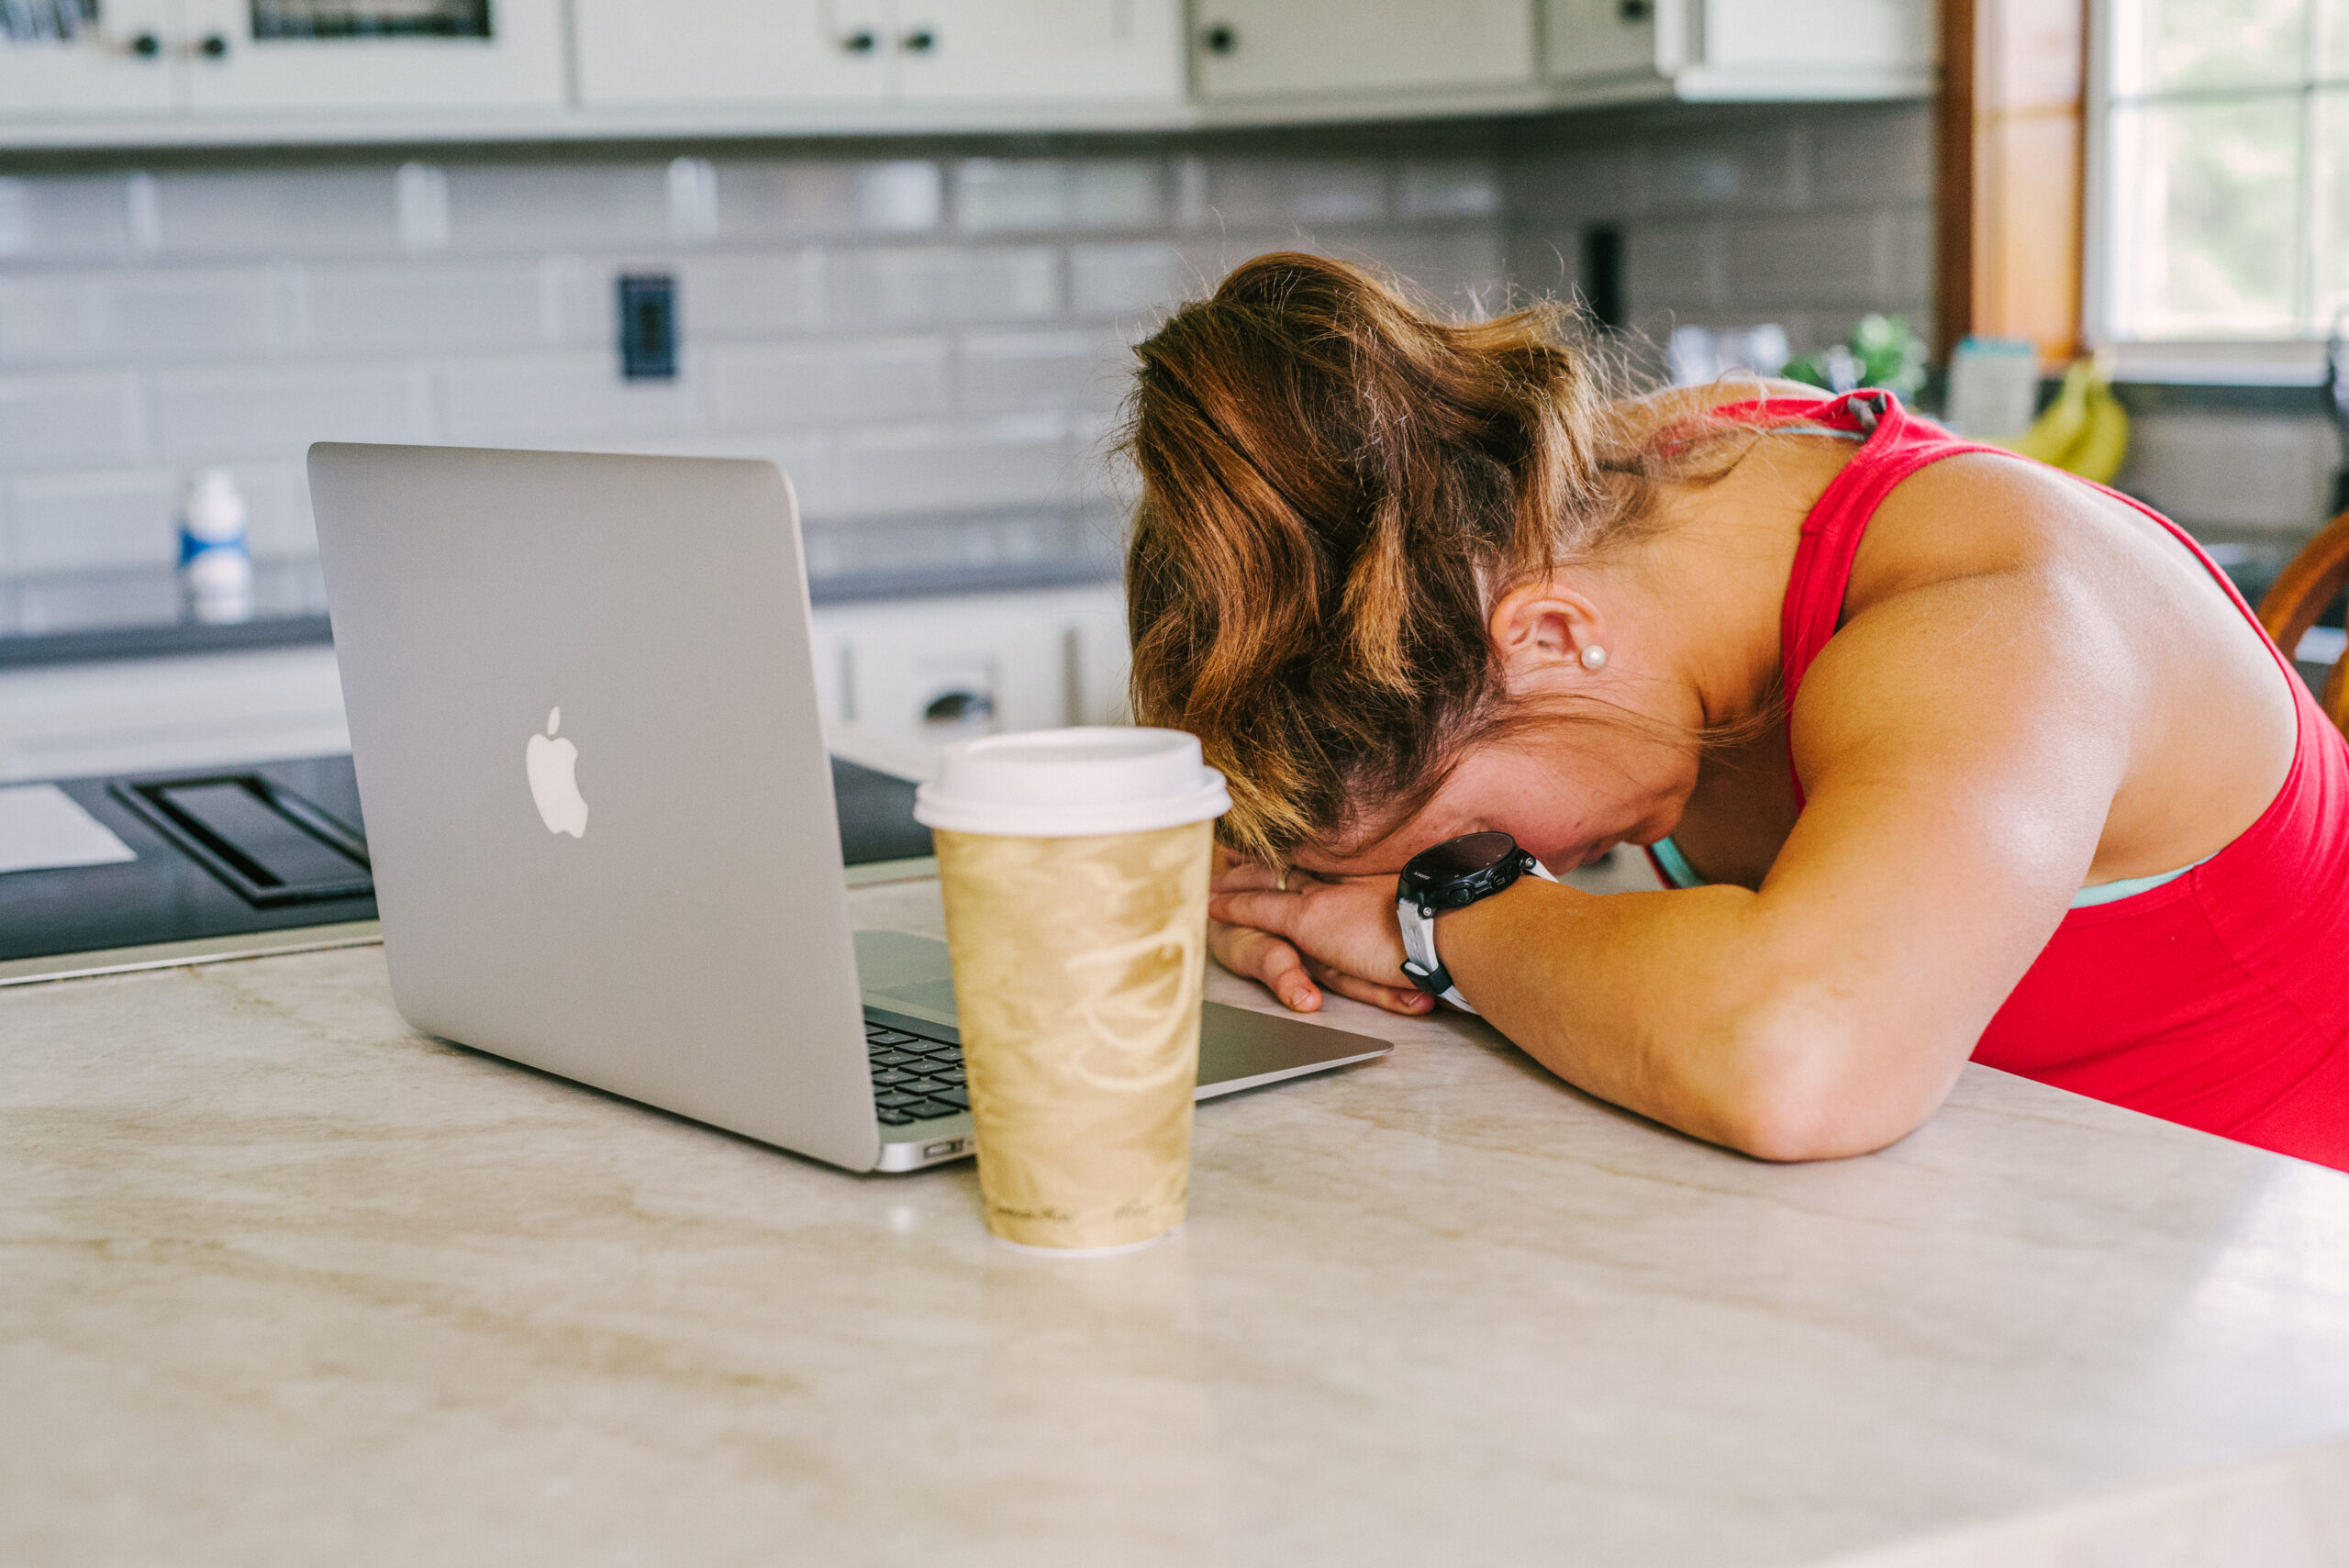 Woman sleeping at computer with a cup of coffee next to her.